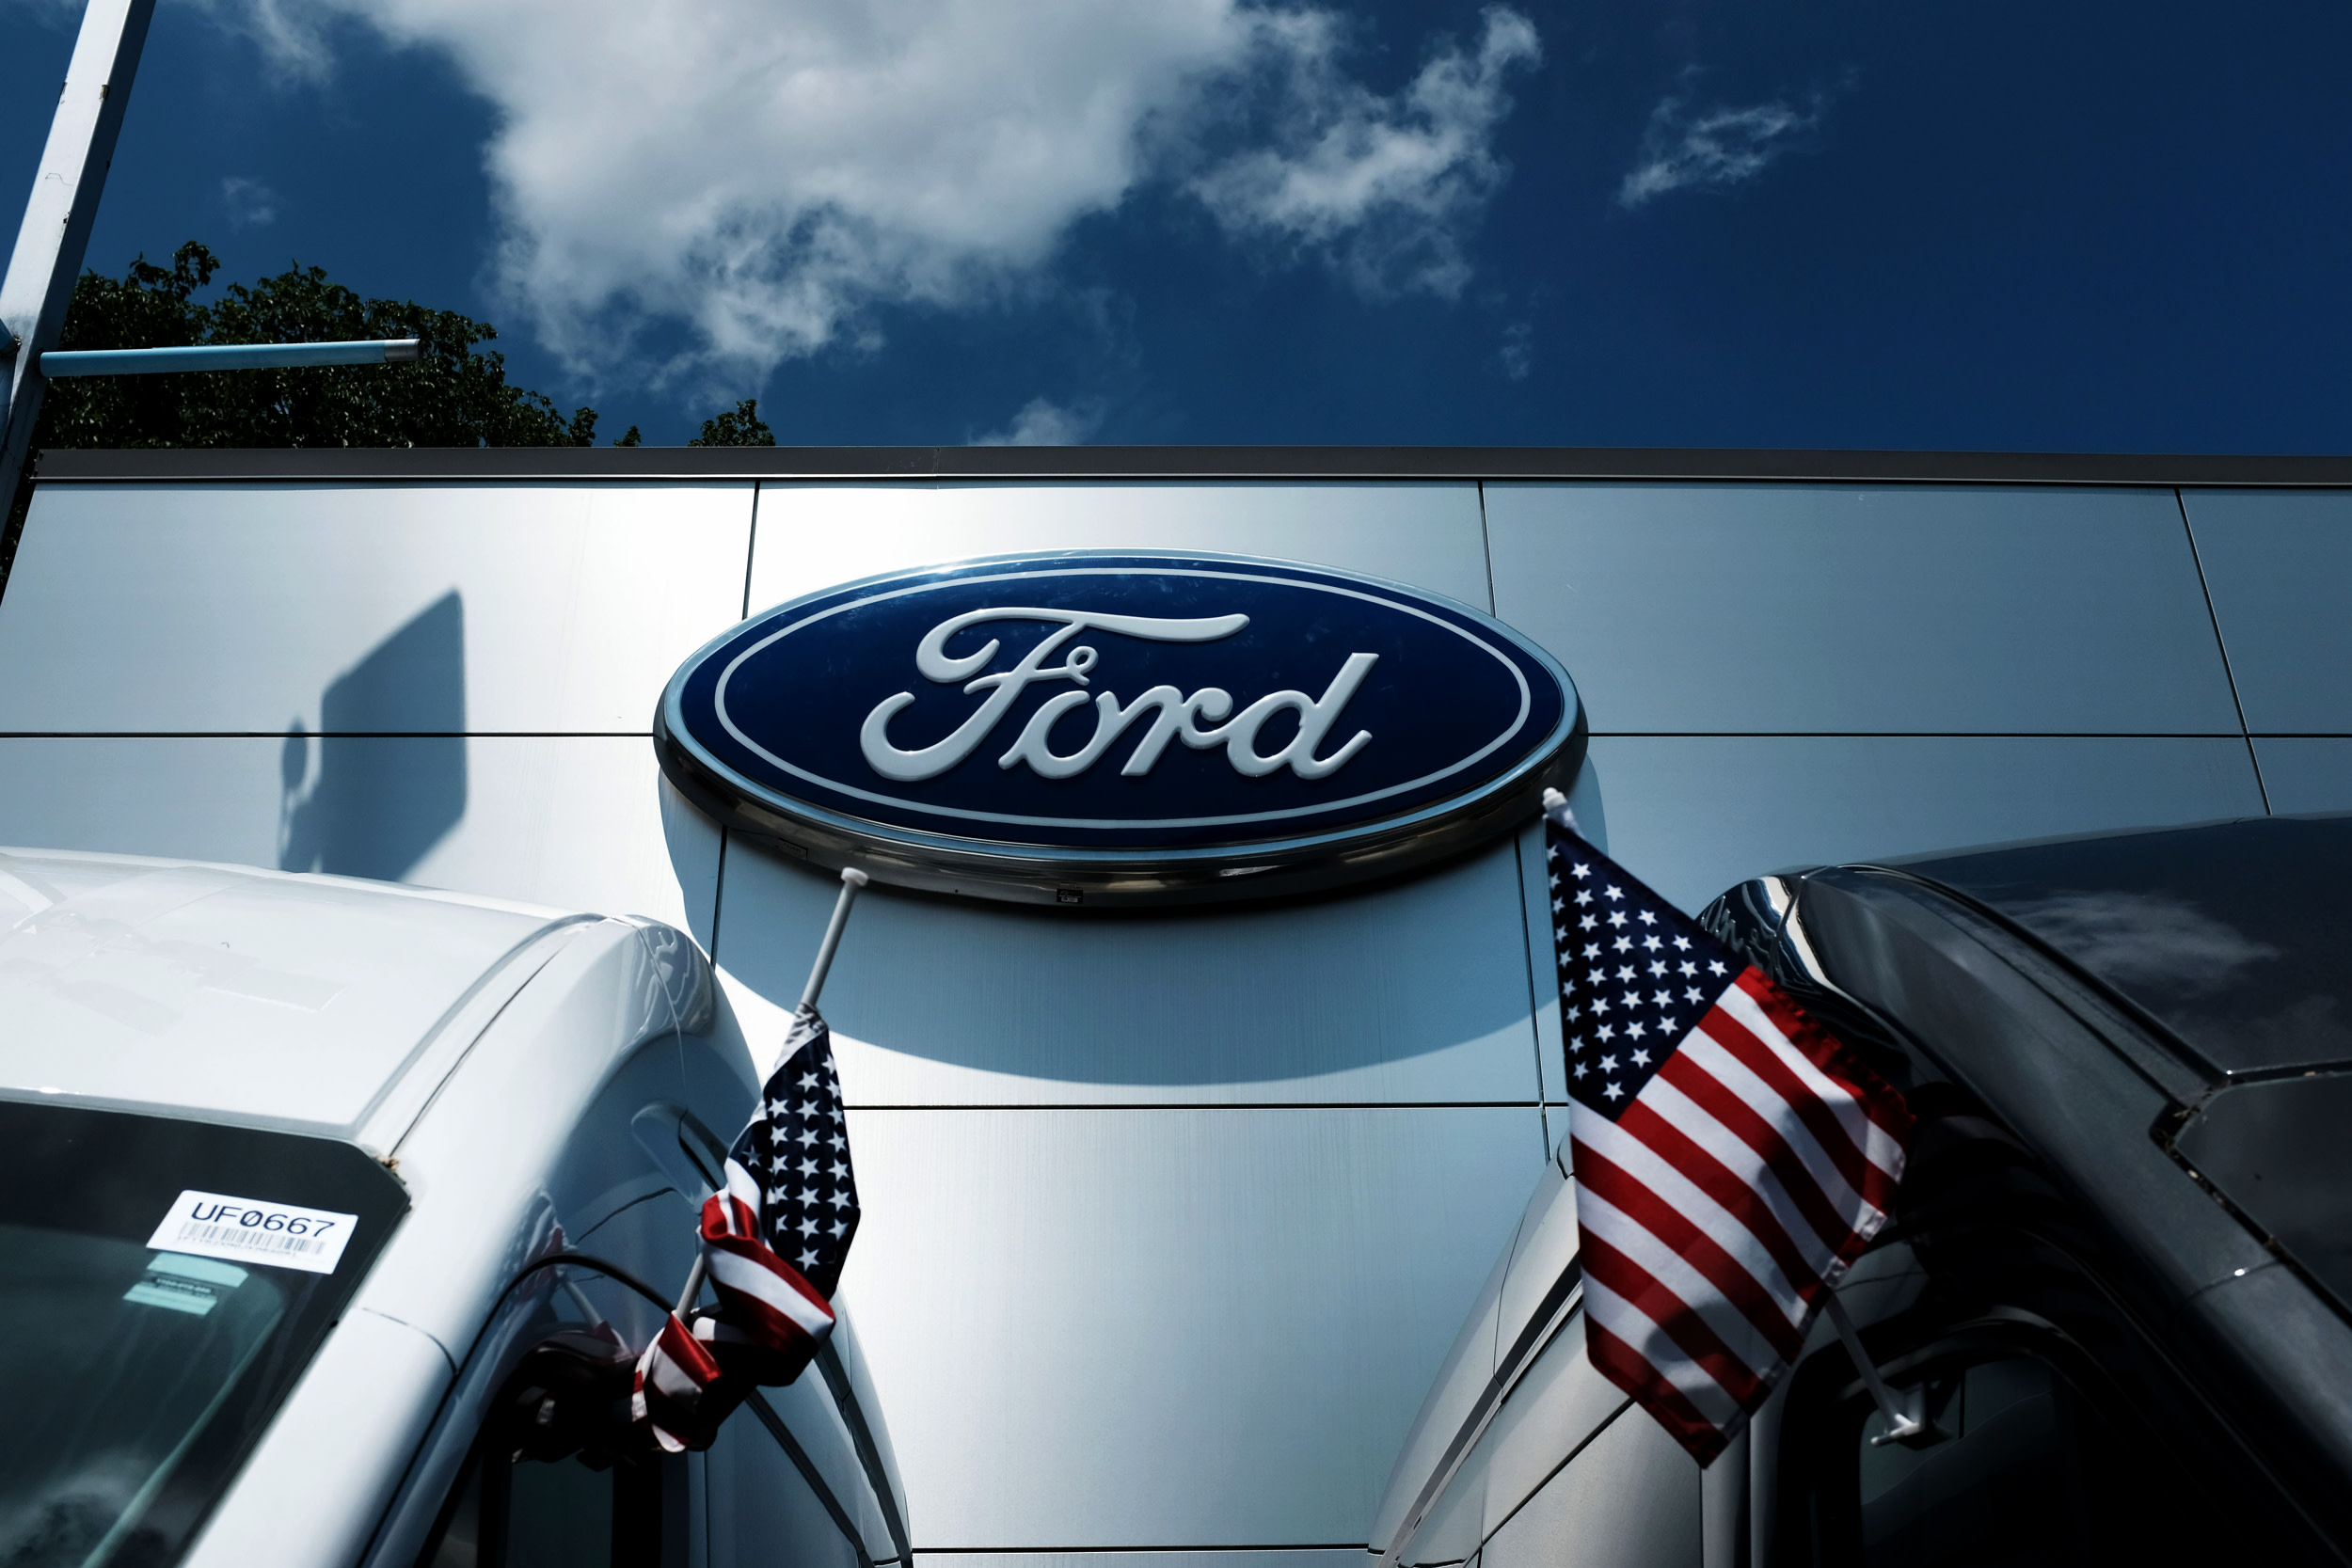 Ford Makes $3.7 Billion Investment in Electric Vehicle Manufacturing in Midwest